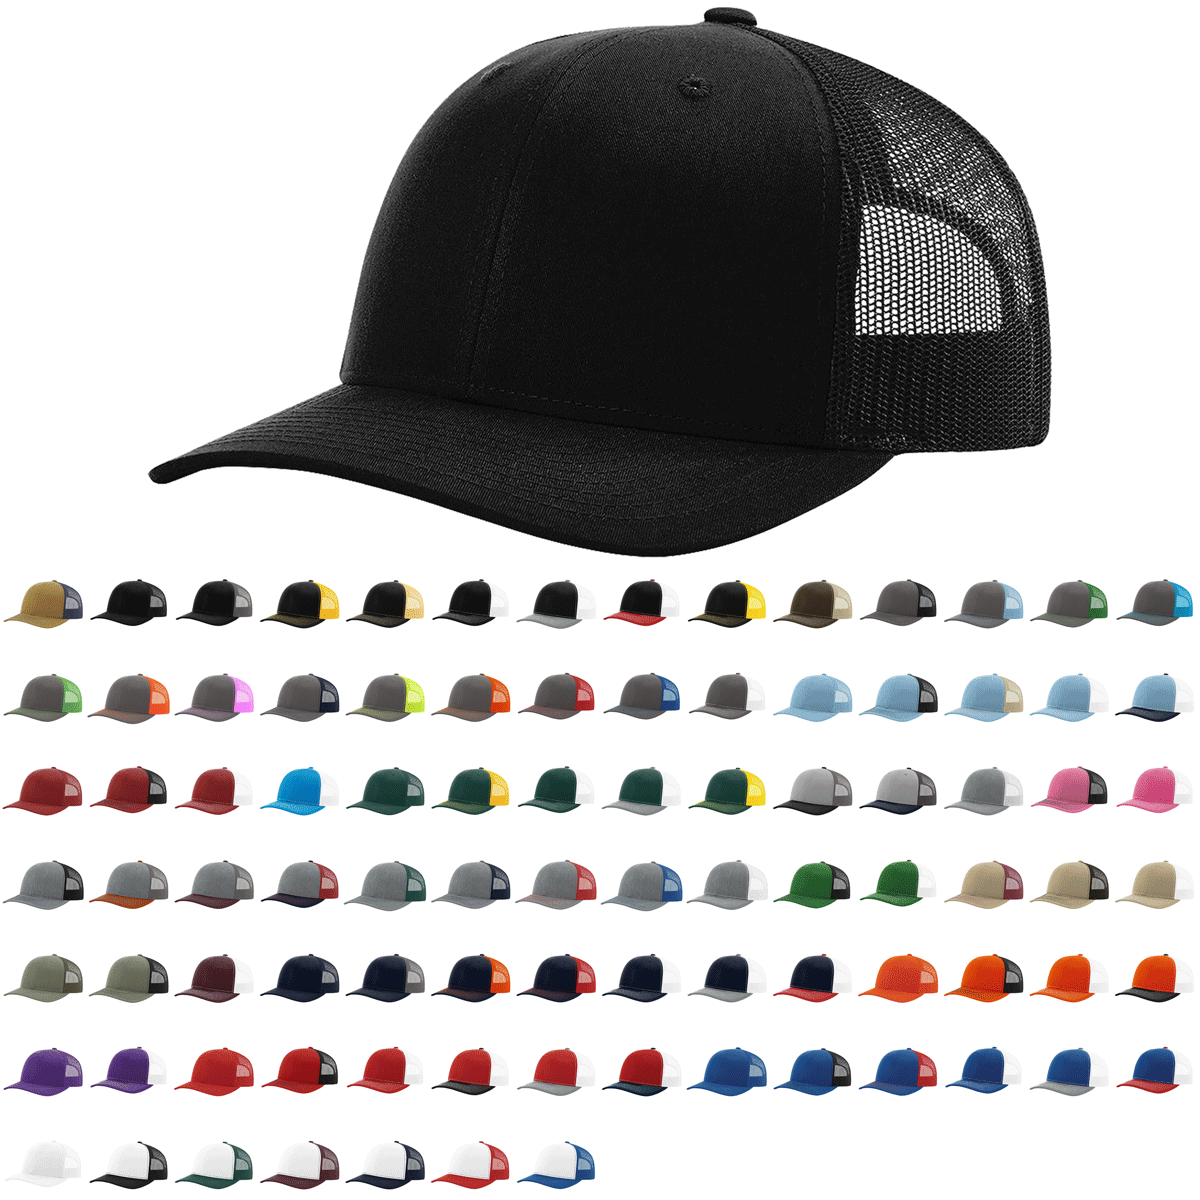 Richardson 112 Trucker Cap Solid Hats Solid Colors One Color - Blank